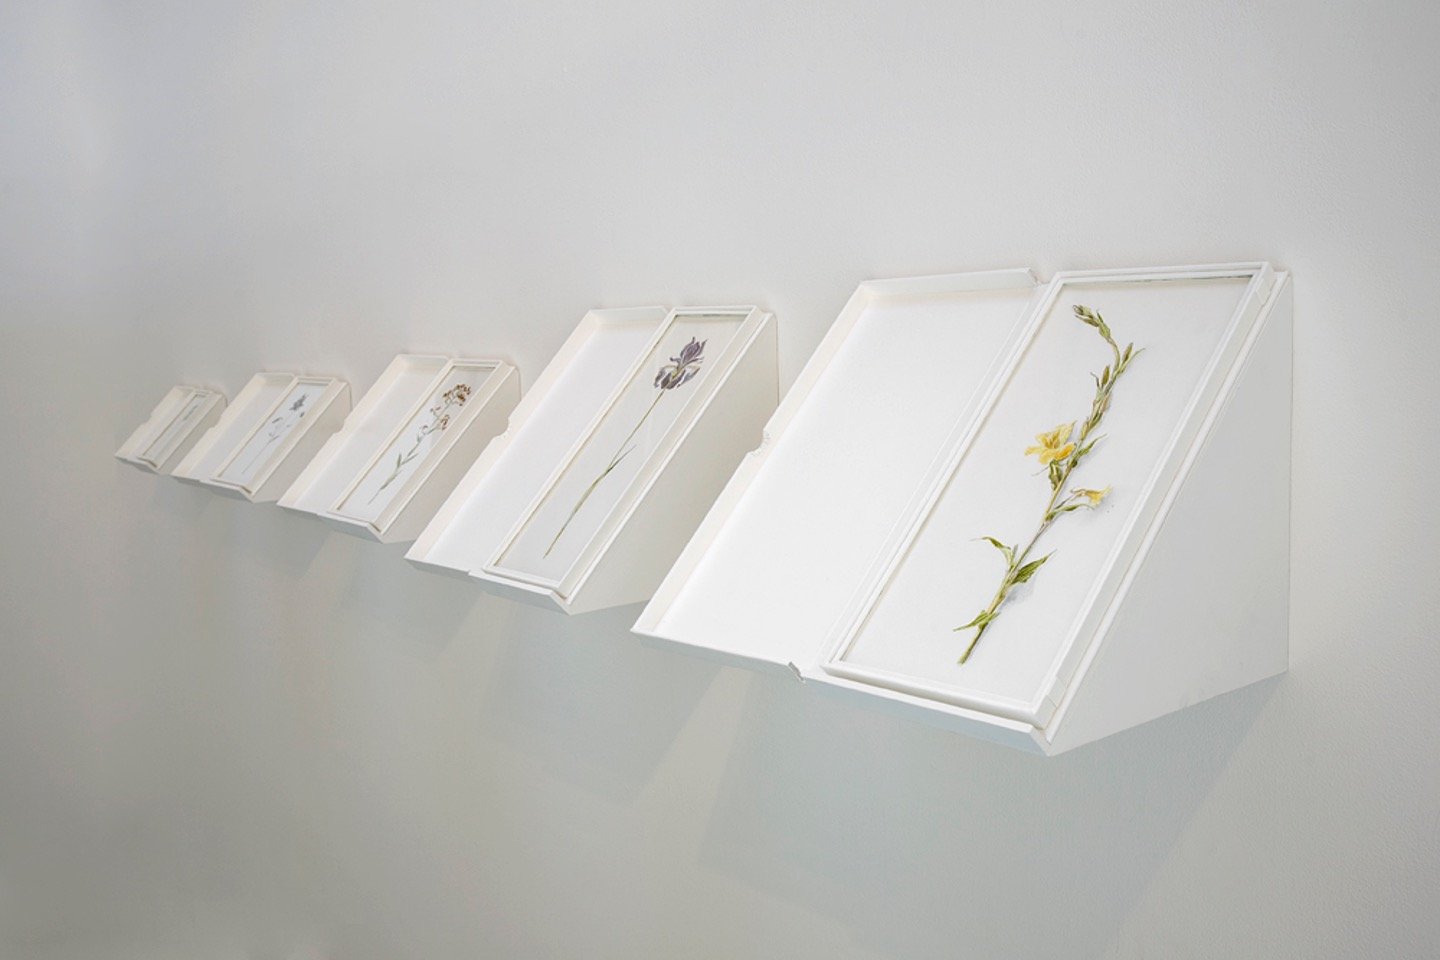   Flowers painted out of their own fugitive colors  inside clamshell boxes, 2012 